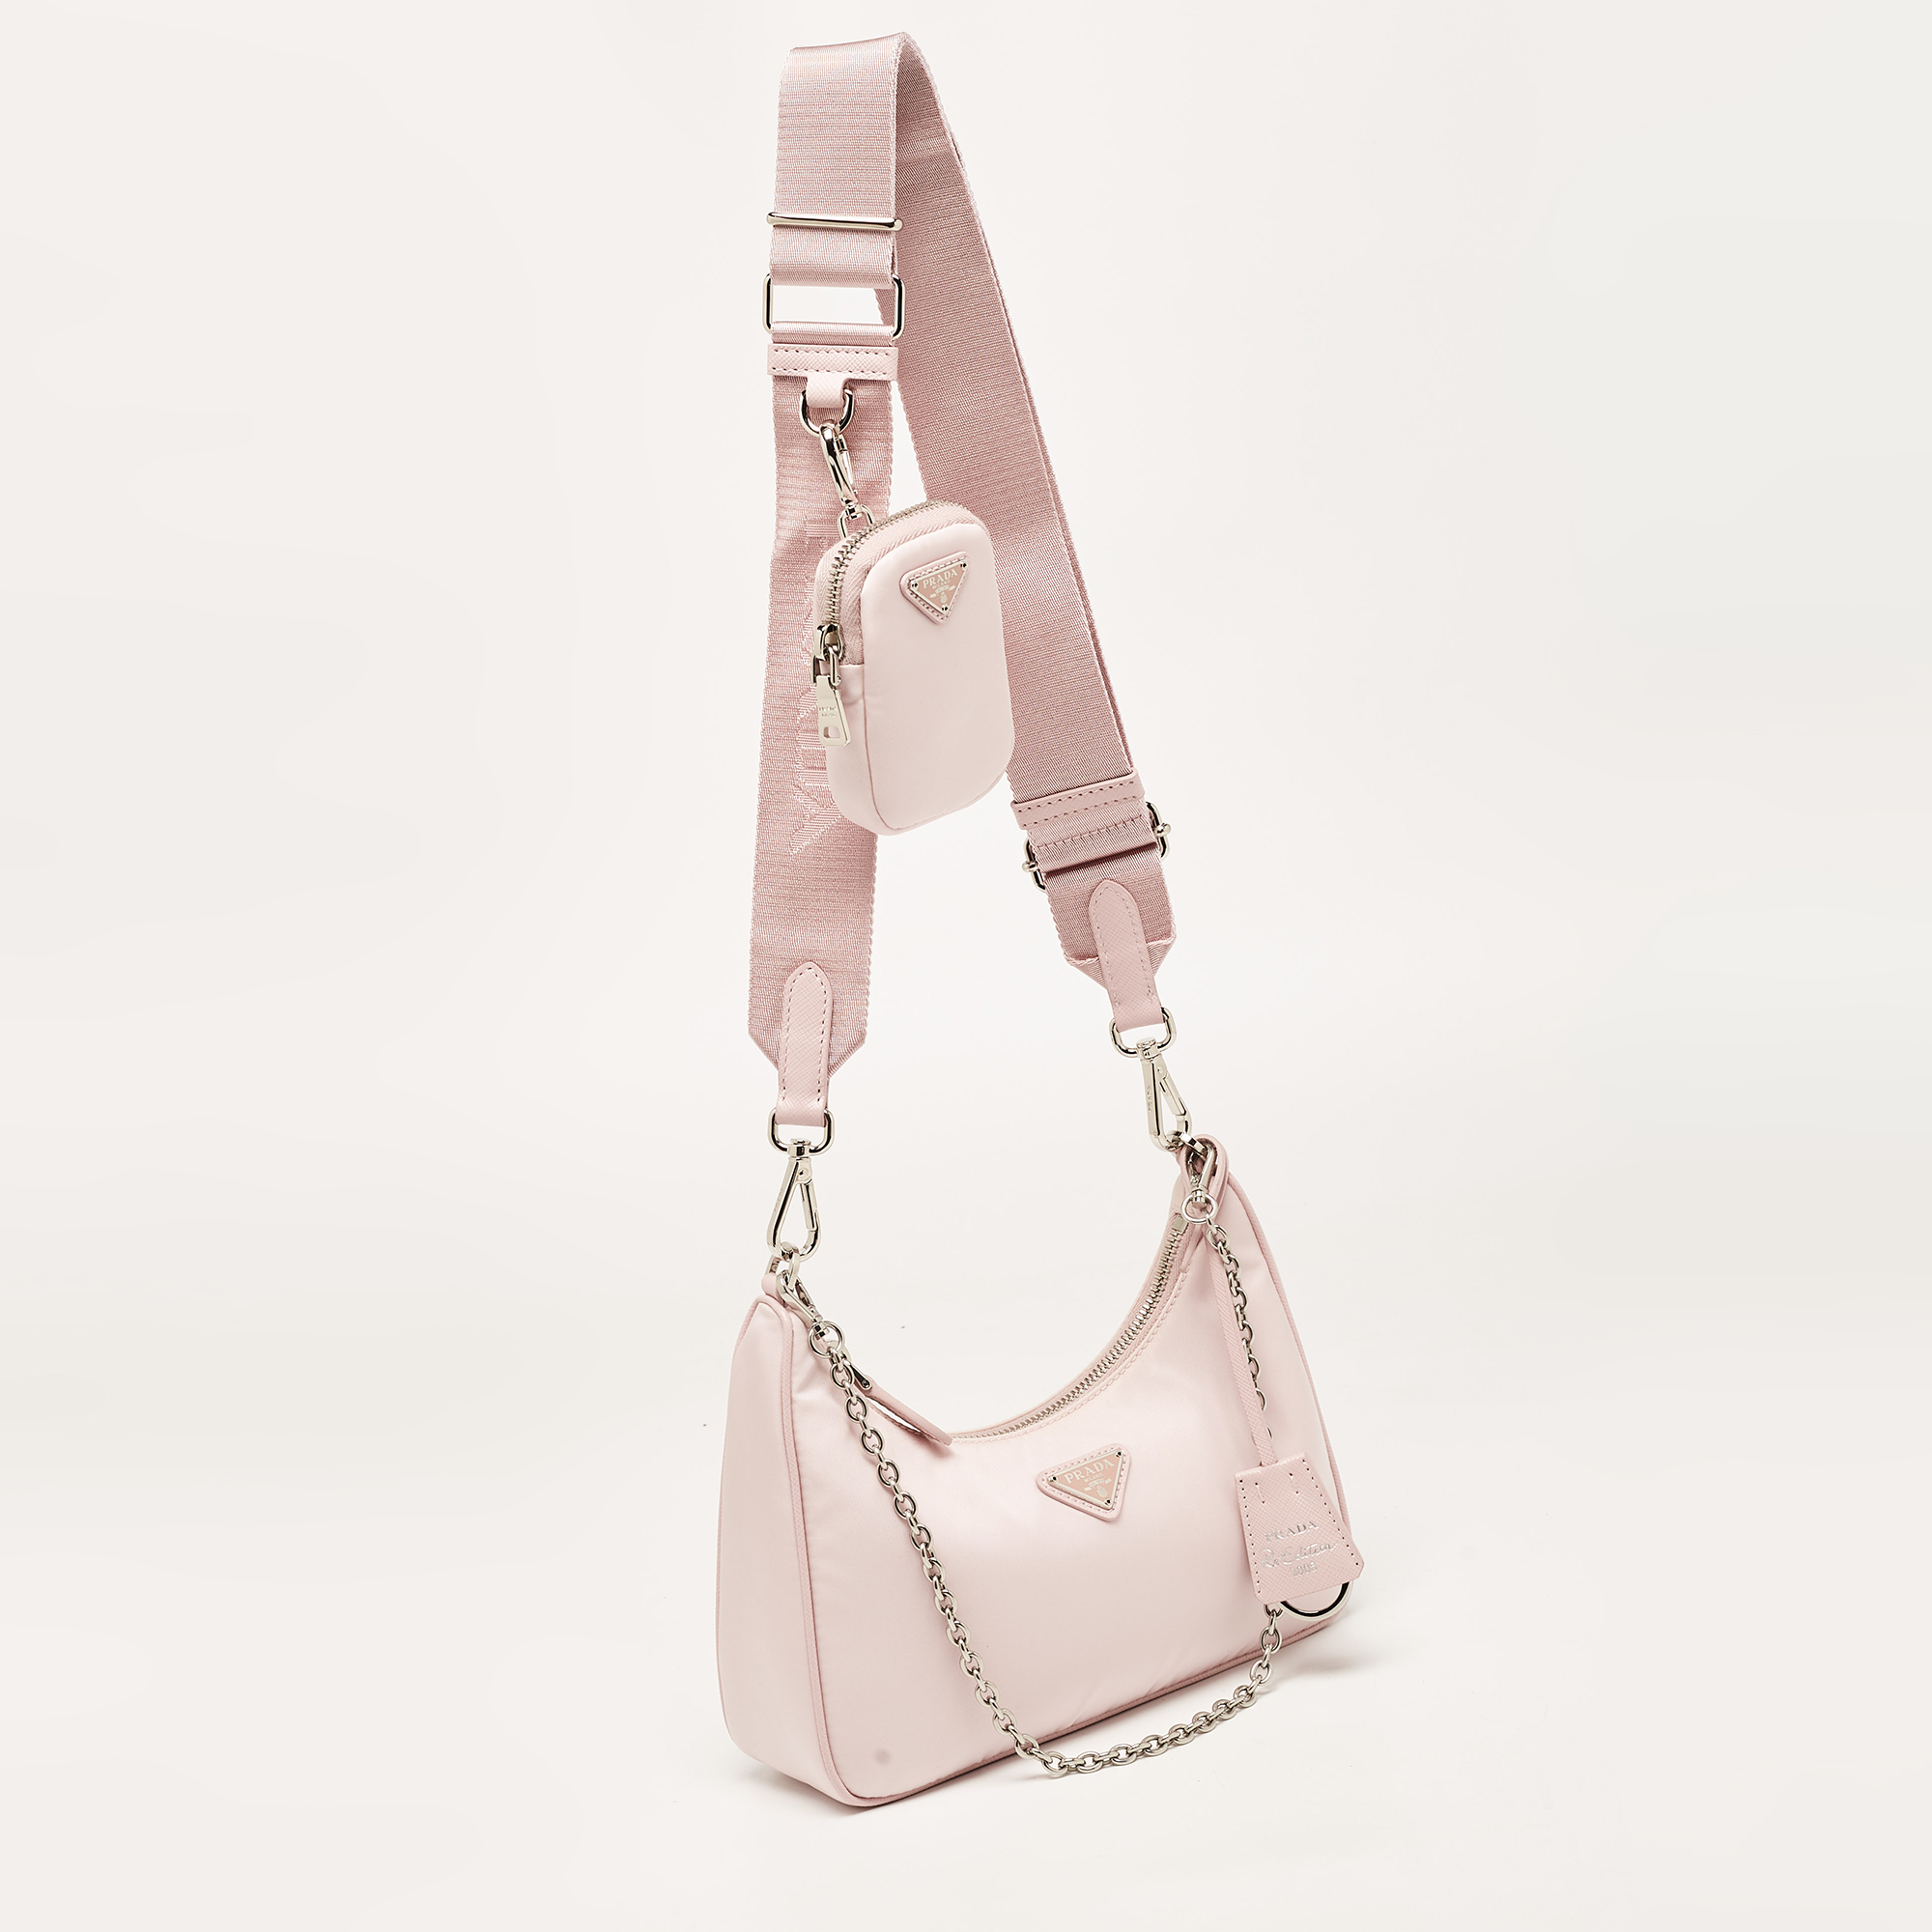 Prada Light Pink Nylon And Leather Re-Edition 2005 Baguette Bag